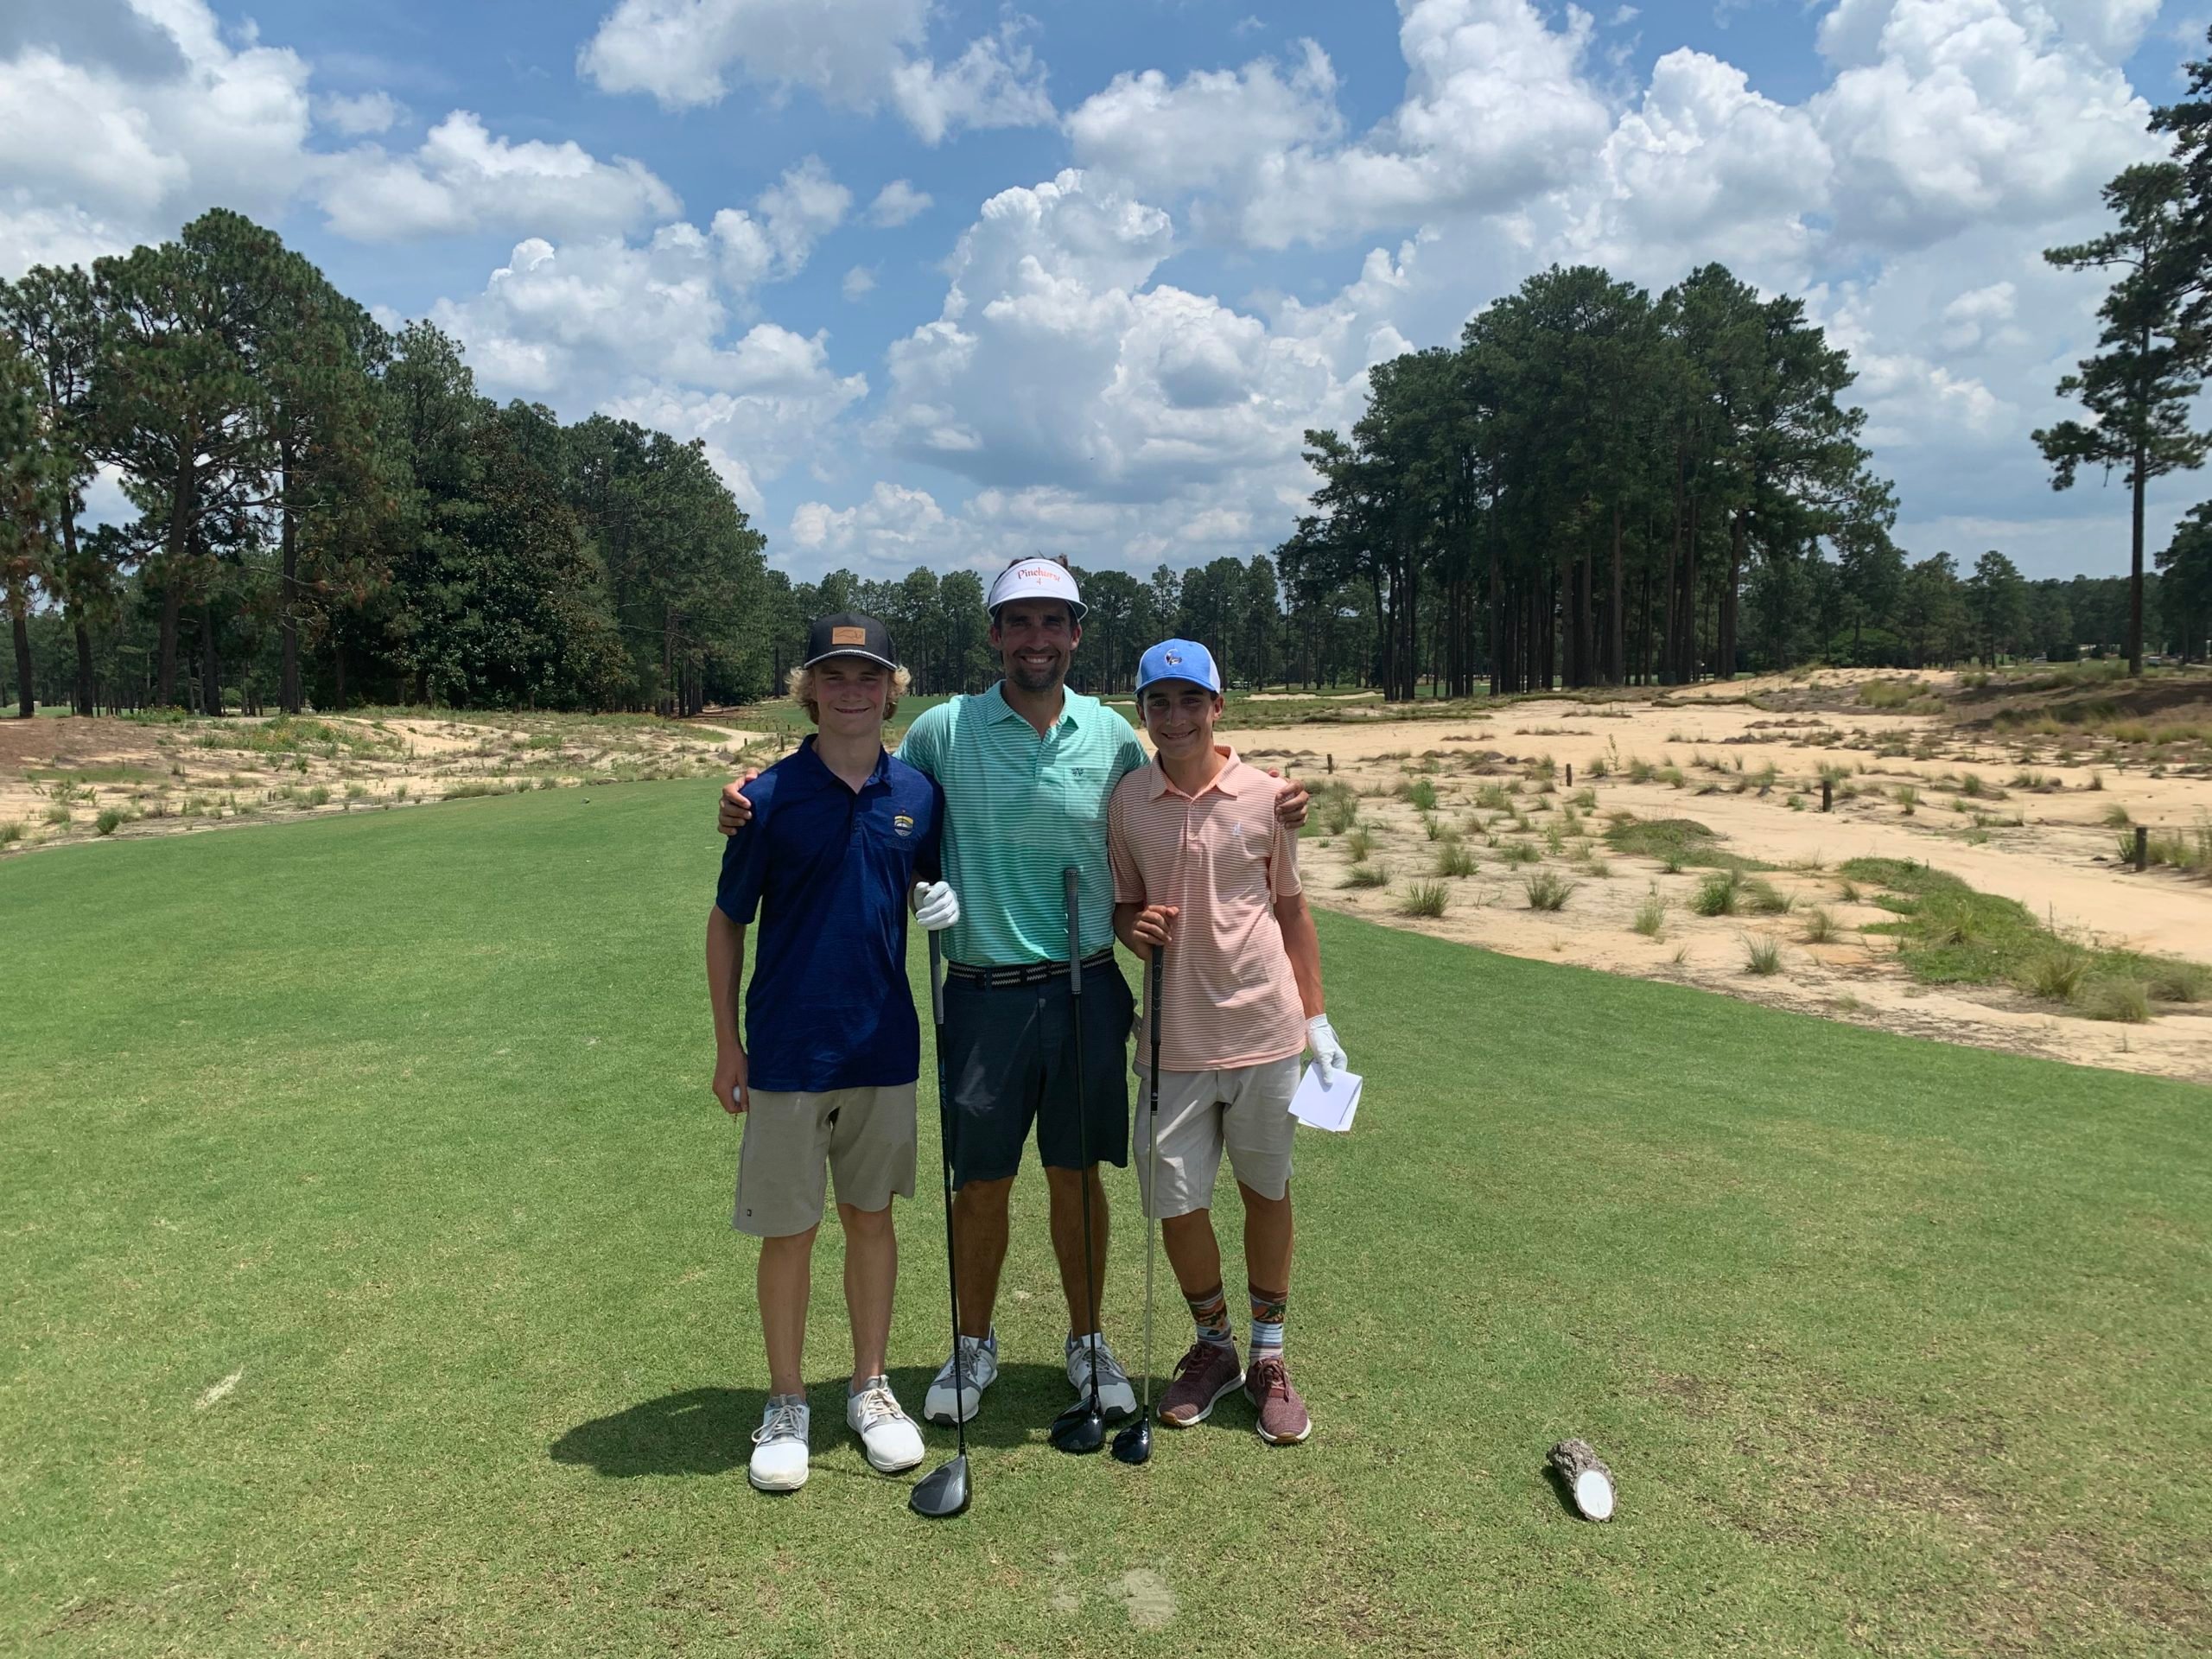 Nate Carr with his two sons (Youth on Course members) enjoying a round of golf